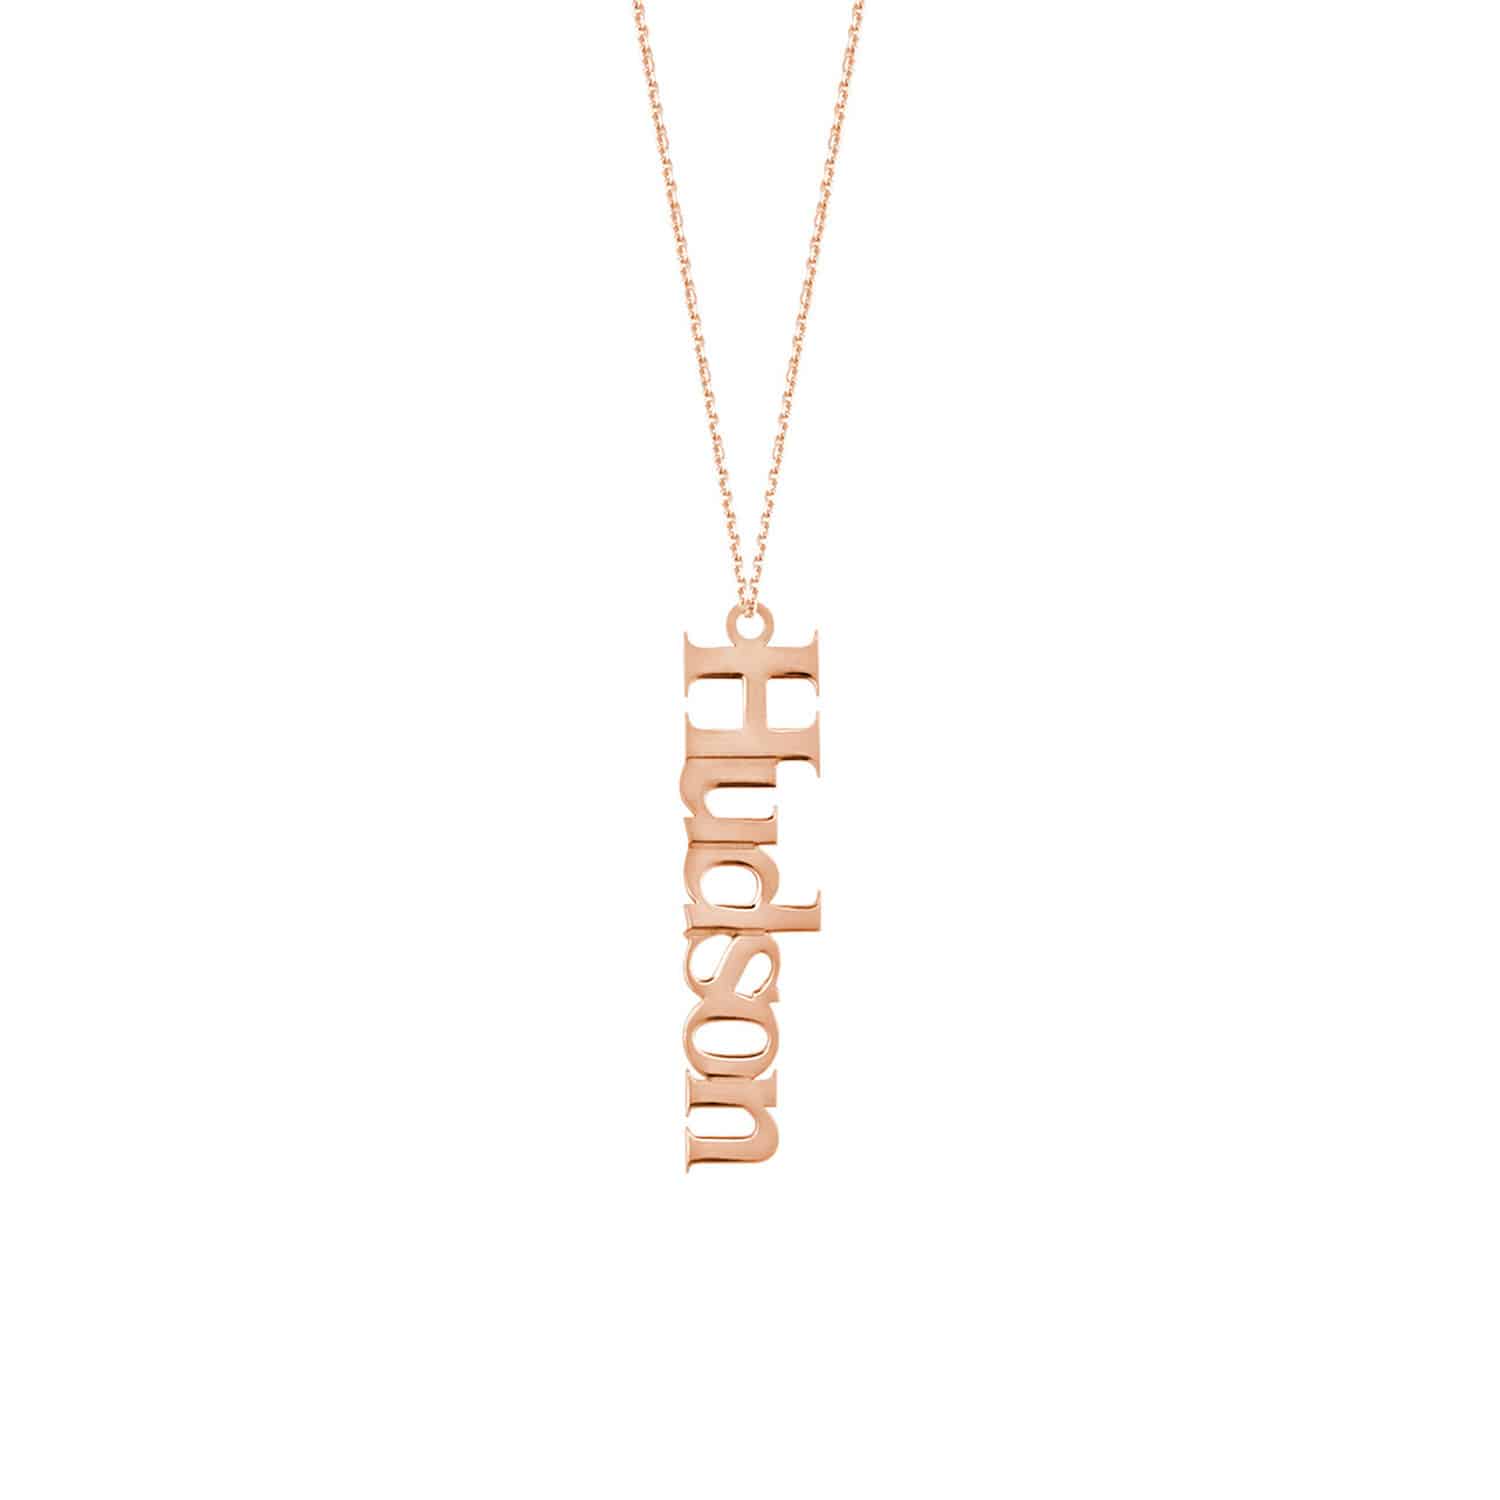 Customizable 14K Gold Yellow White Rose Vertical Nameplate Pendant Necklace - Rose Gold, 14"-16" Adjustable